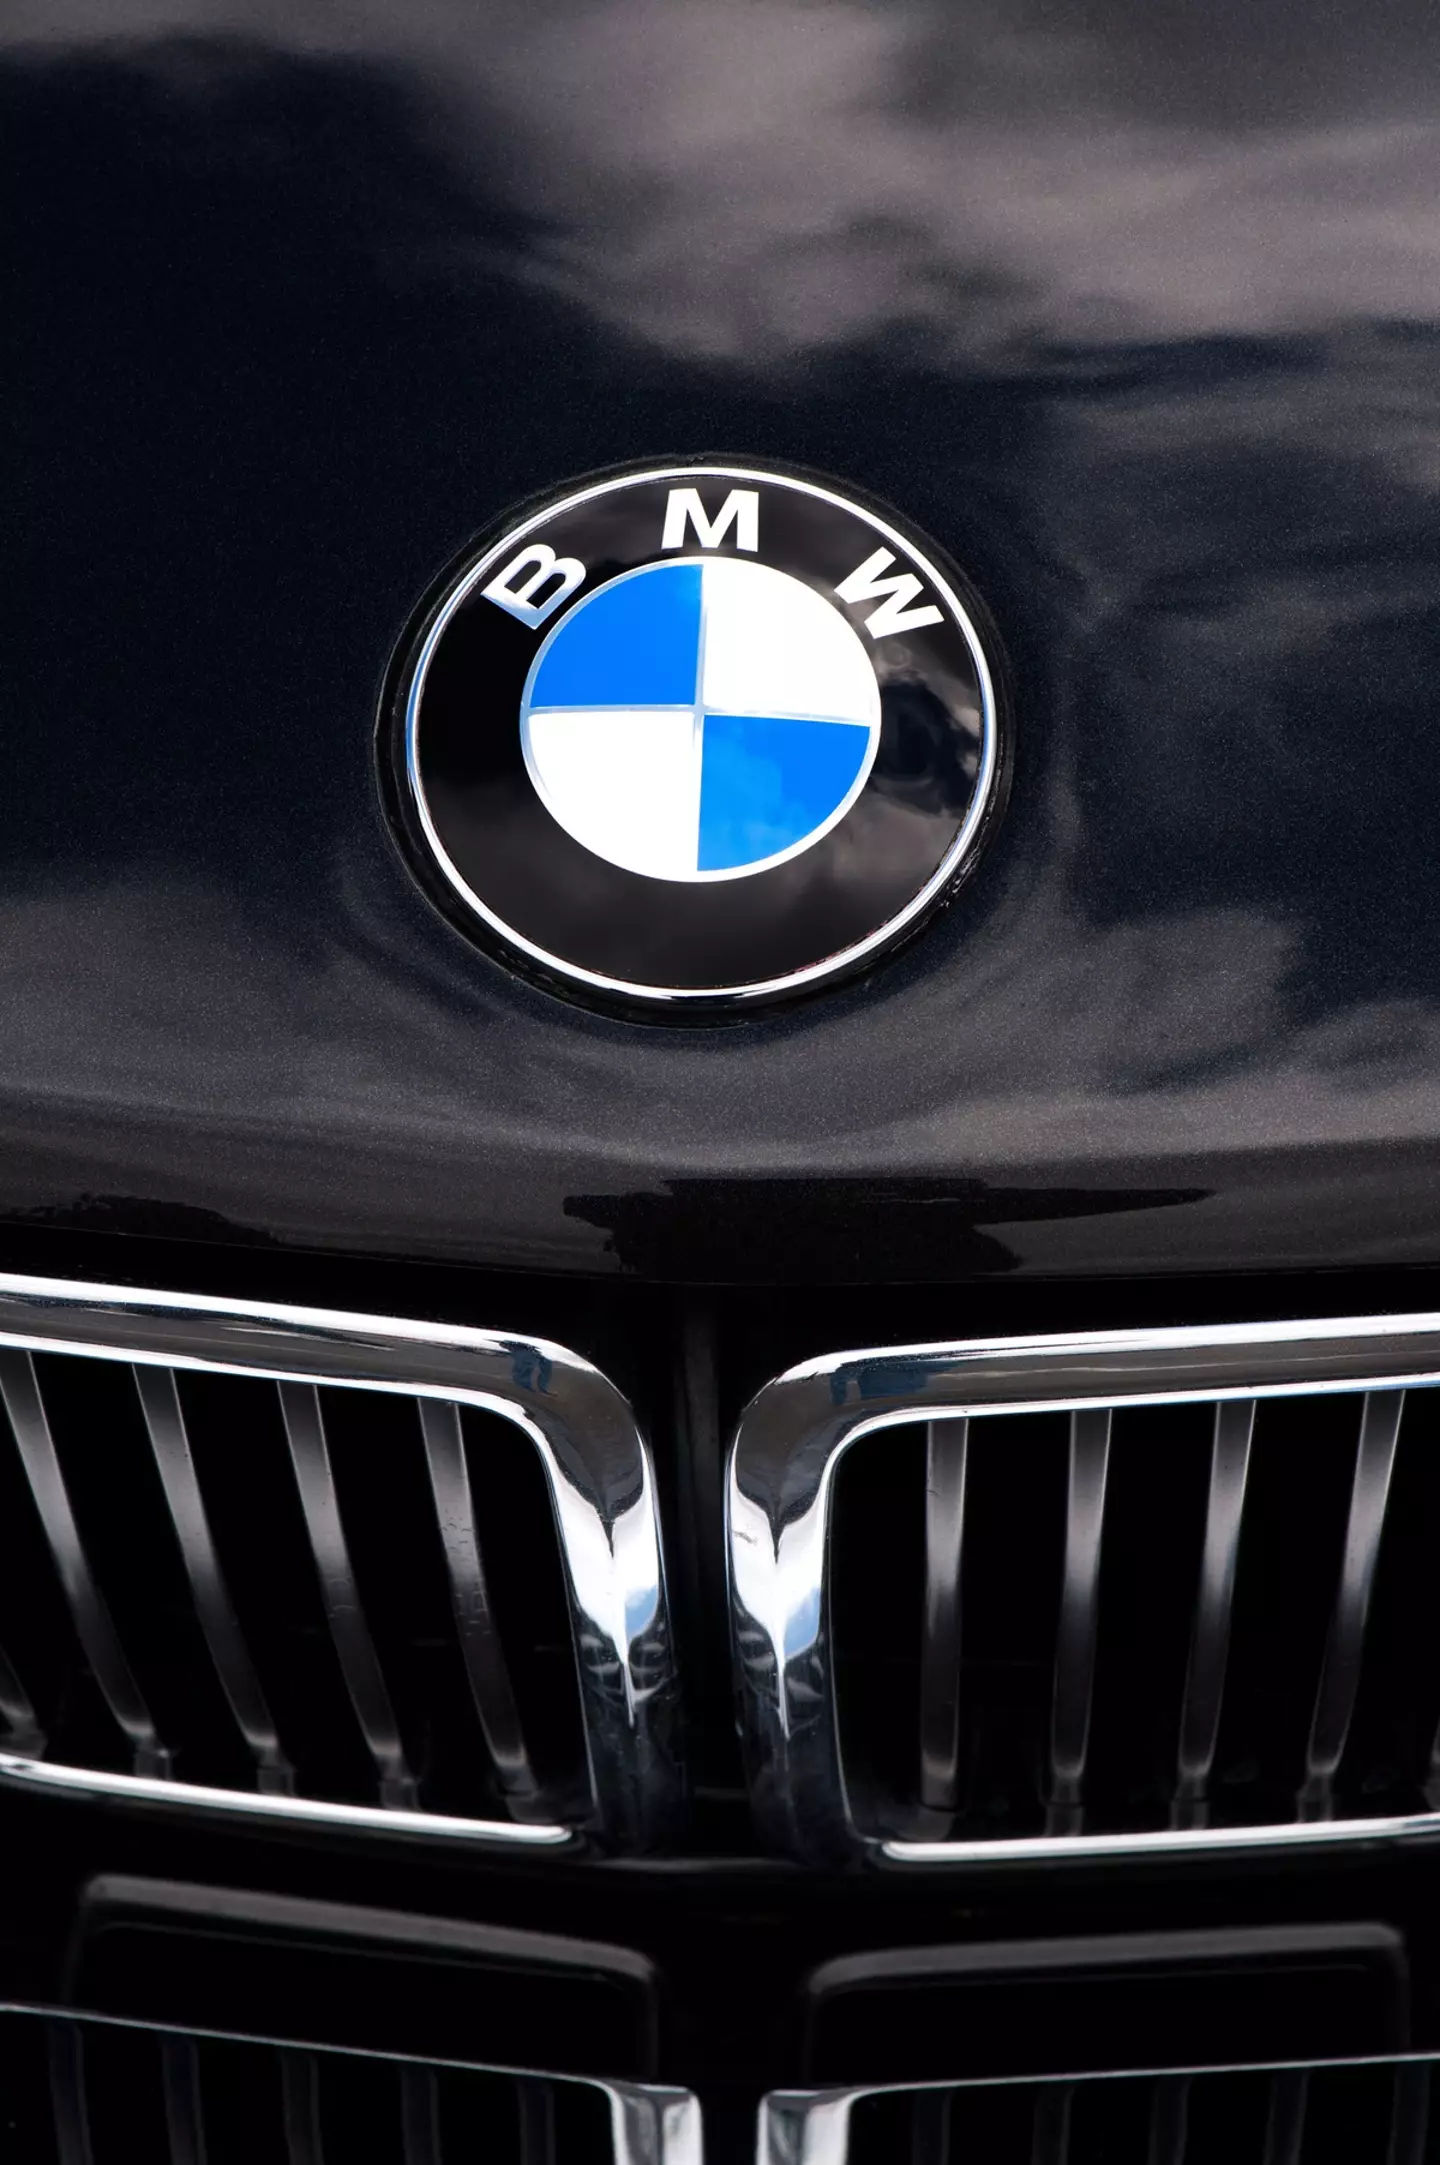 A study has found that 95 percent of people pronounce the name of BMW wrong.